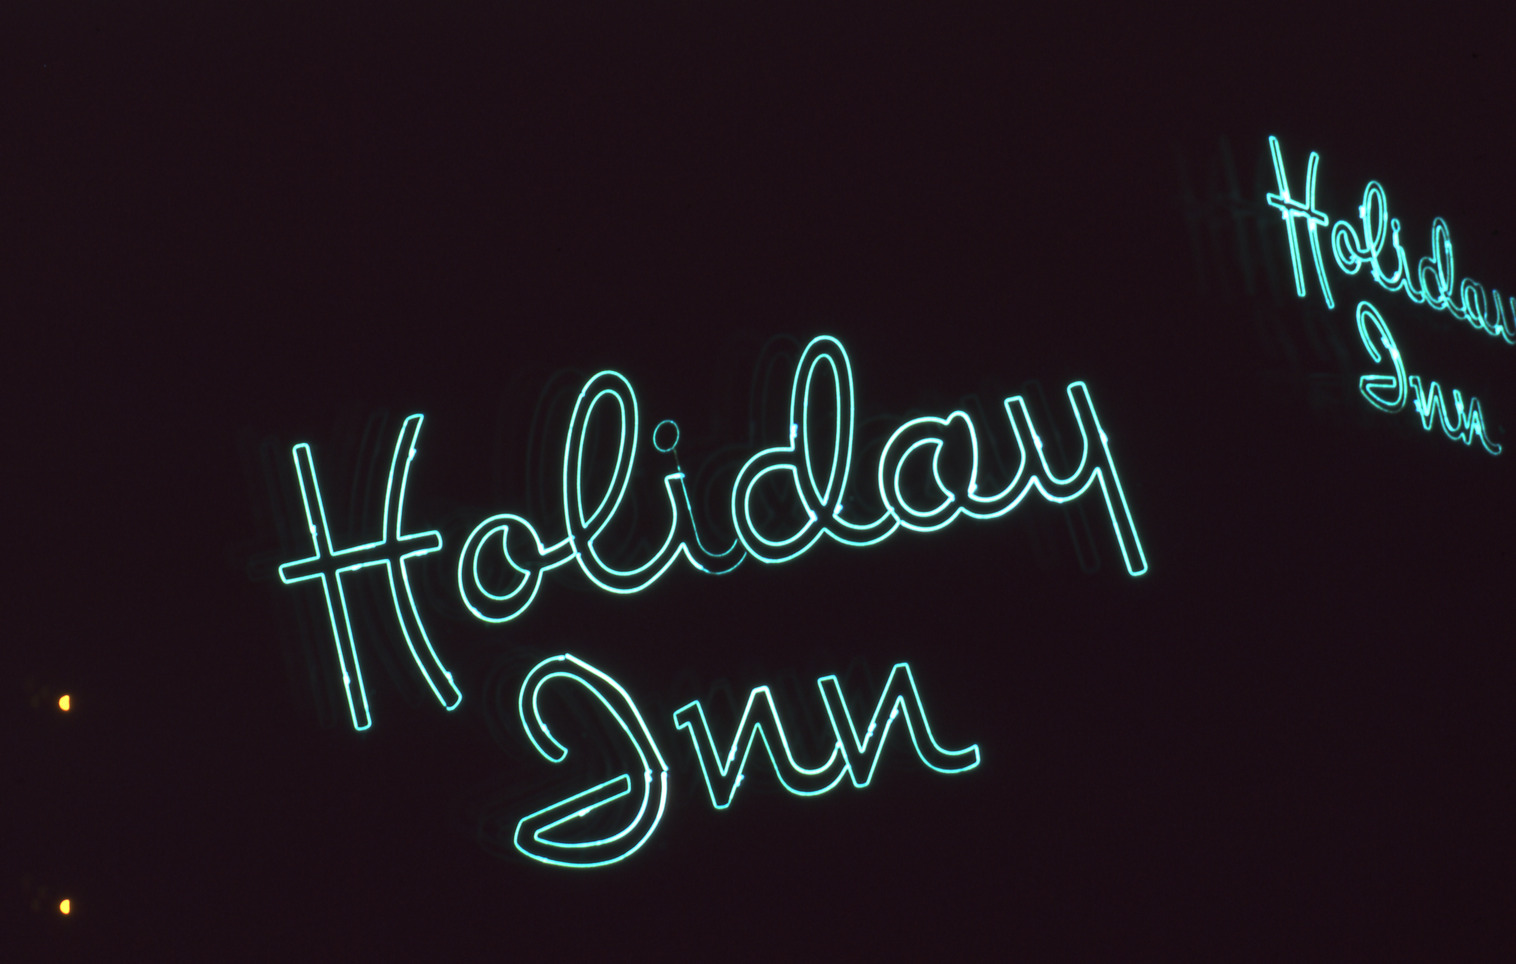 Holiday Inn lettering signs, Las Vegas, Nevada: photographic print